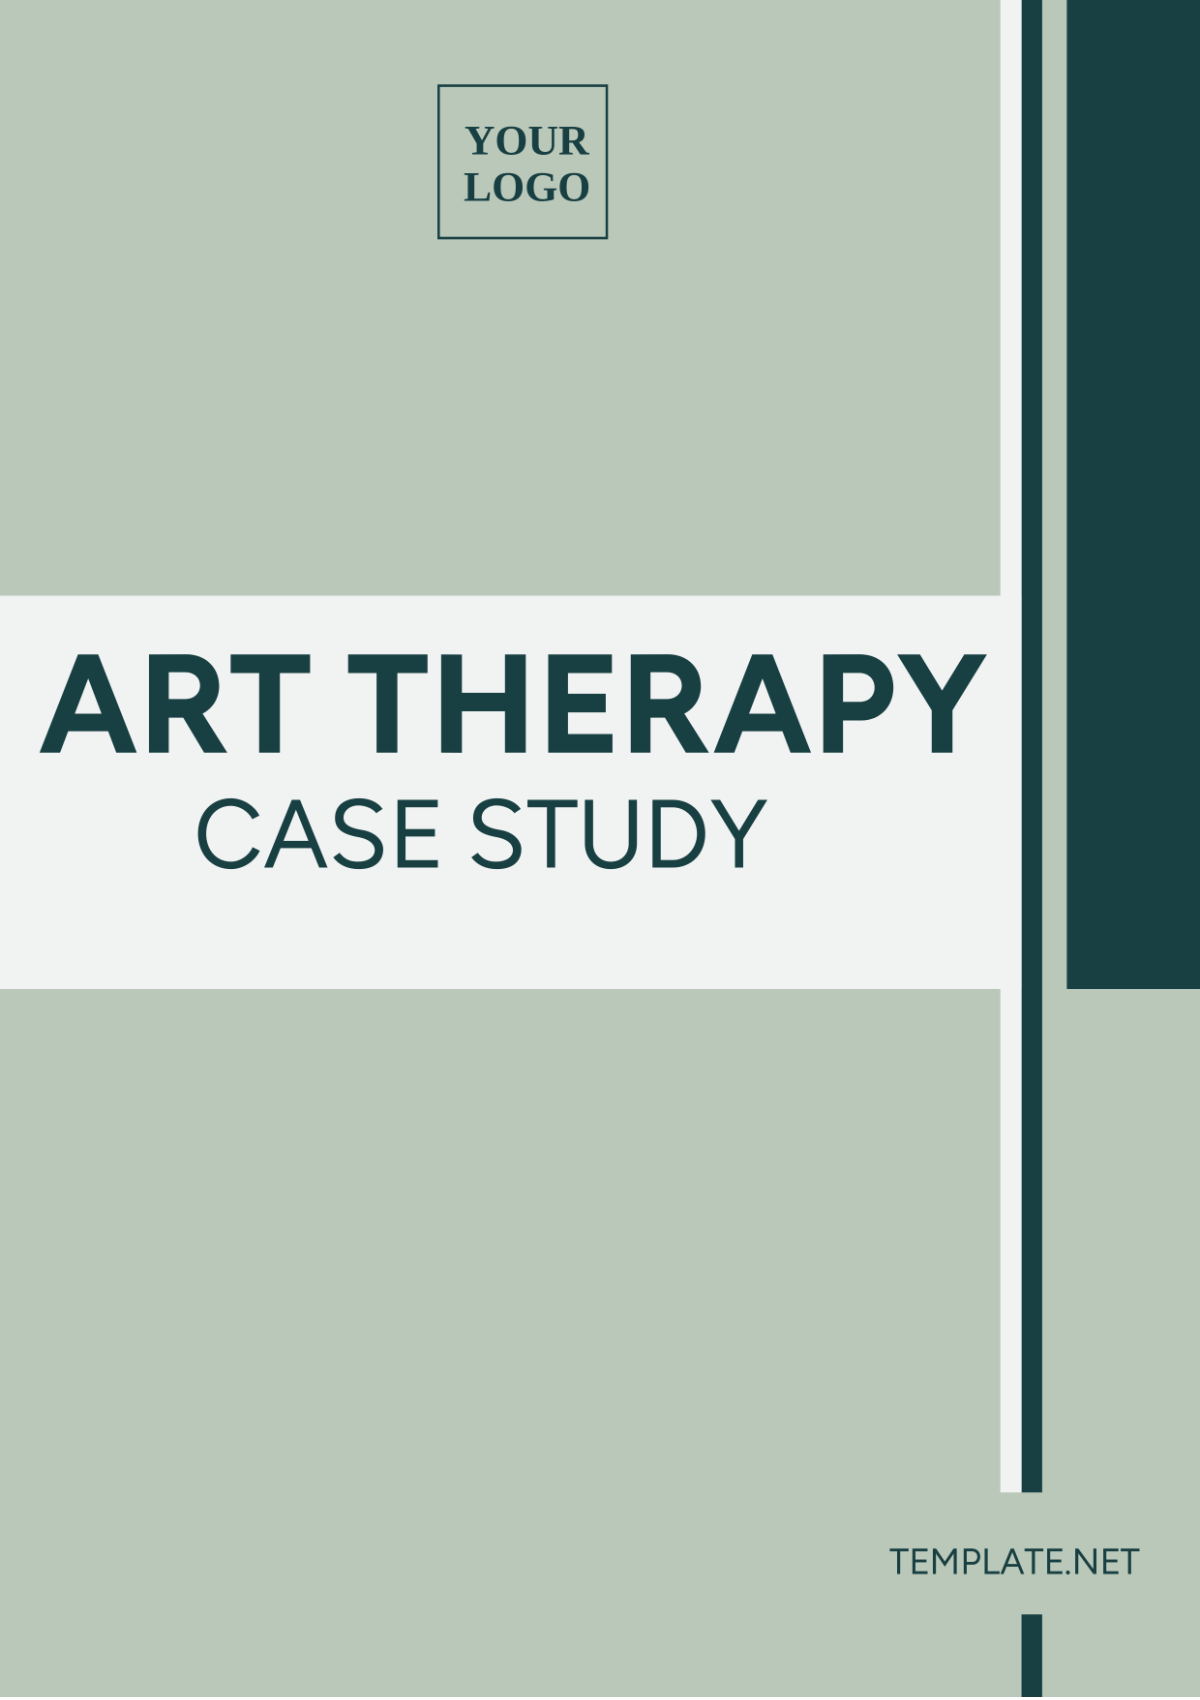 Art Therapy Case Study Template